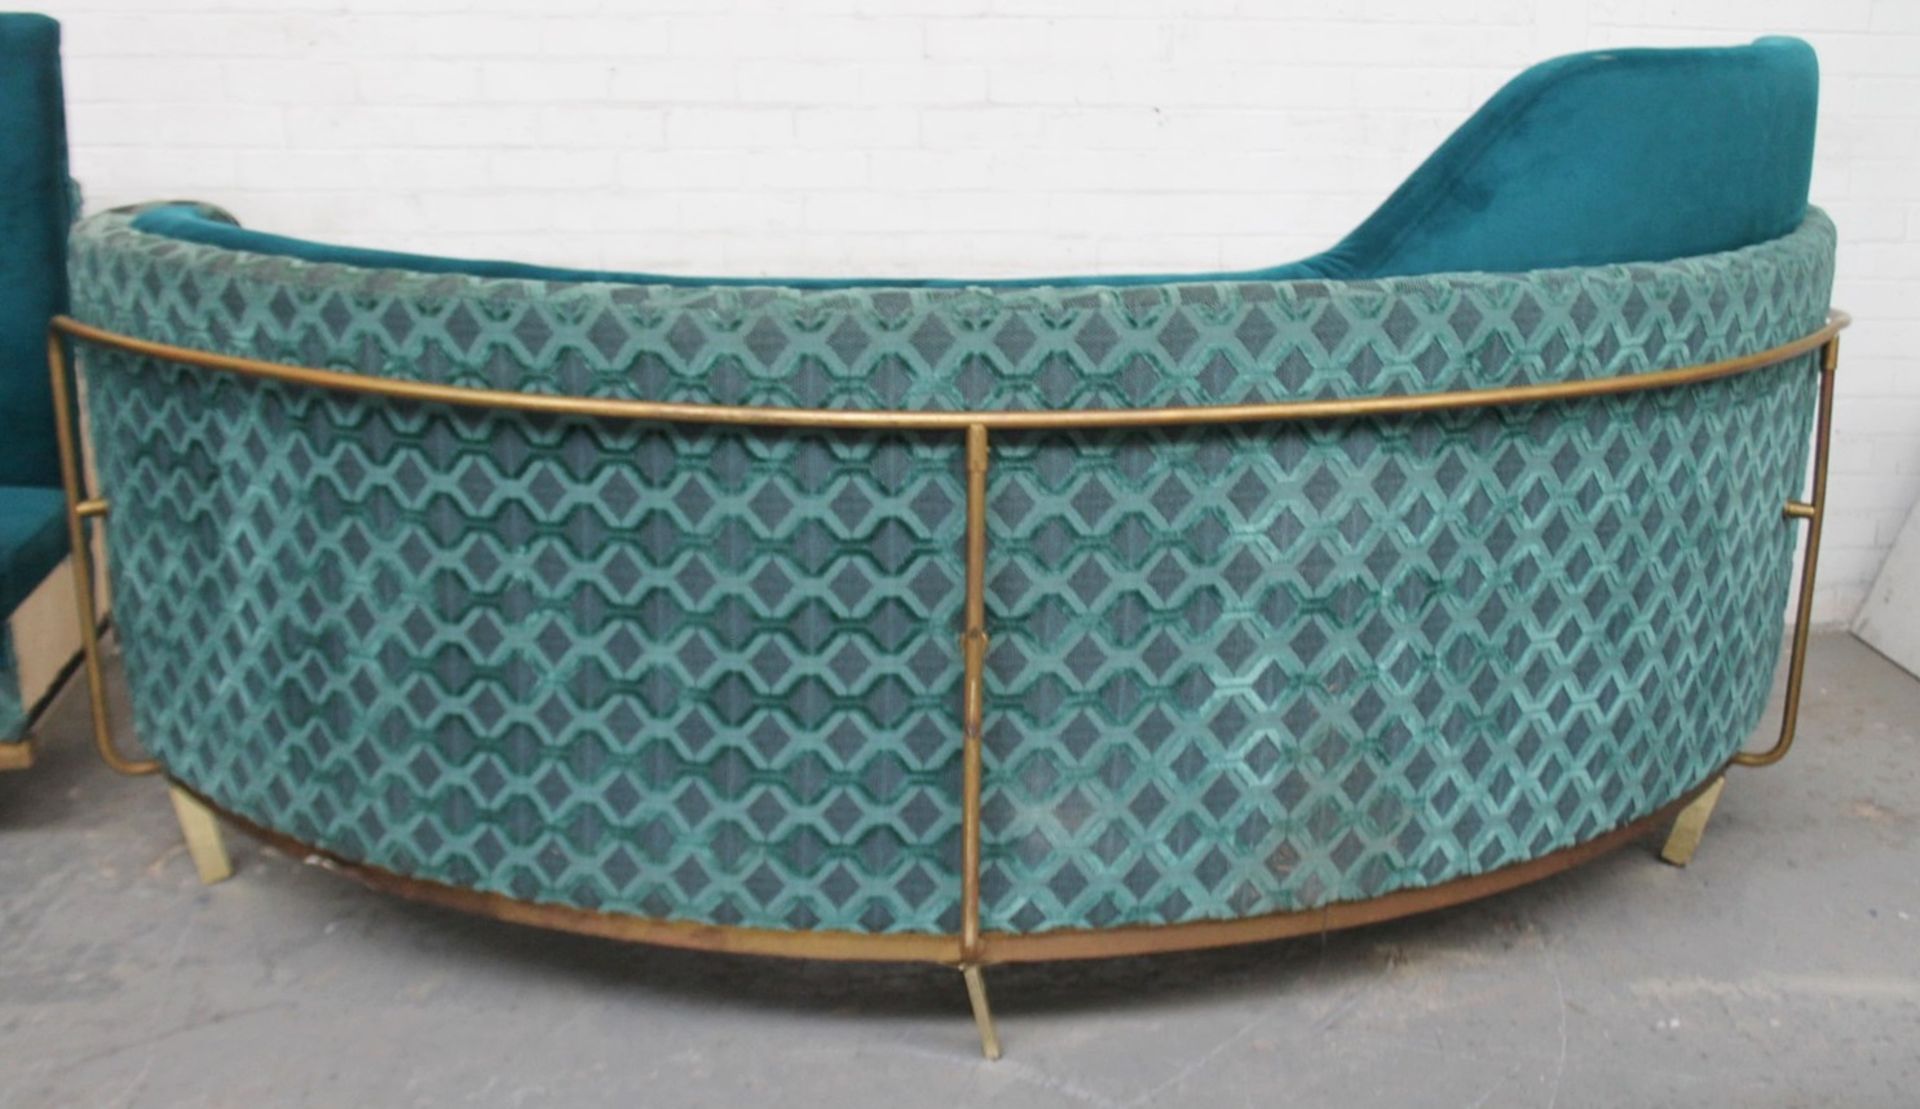 1 x Bespoke Commercial Curved C-Shaped Booth Seating Upholstered In Premium Teal Coloured Fabrics - - Image 15 of 17